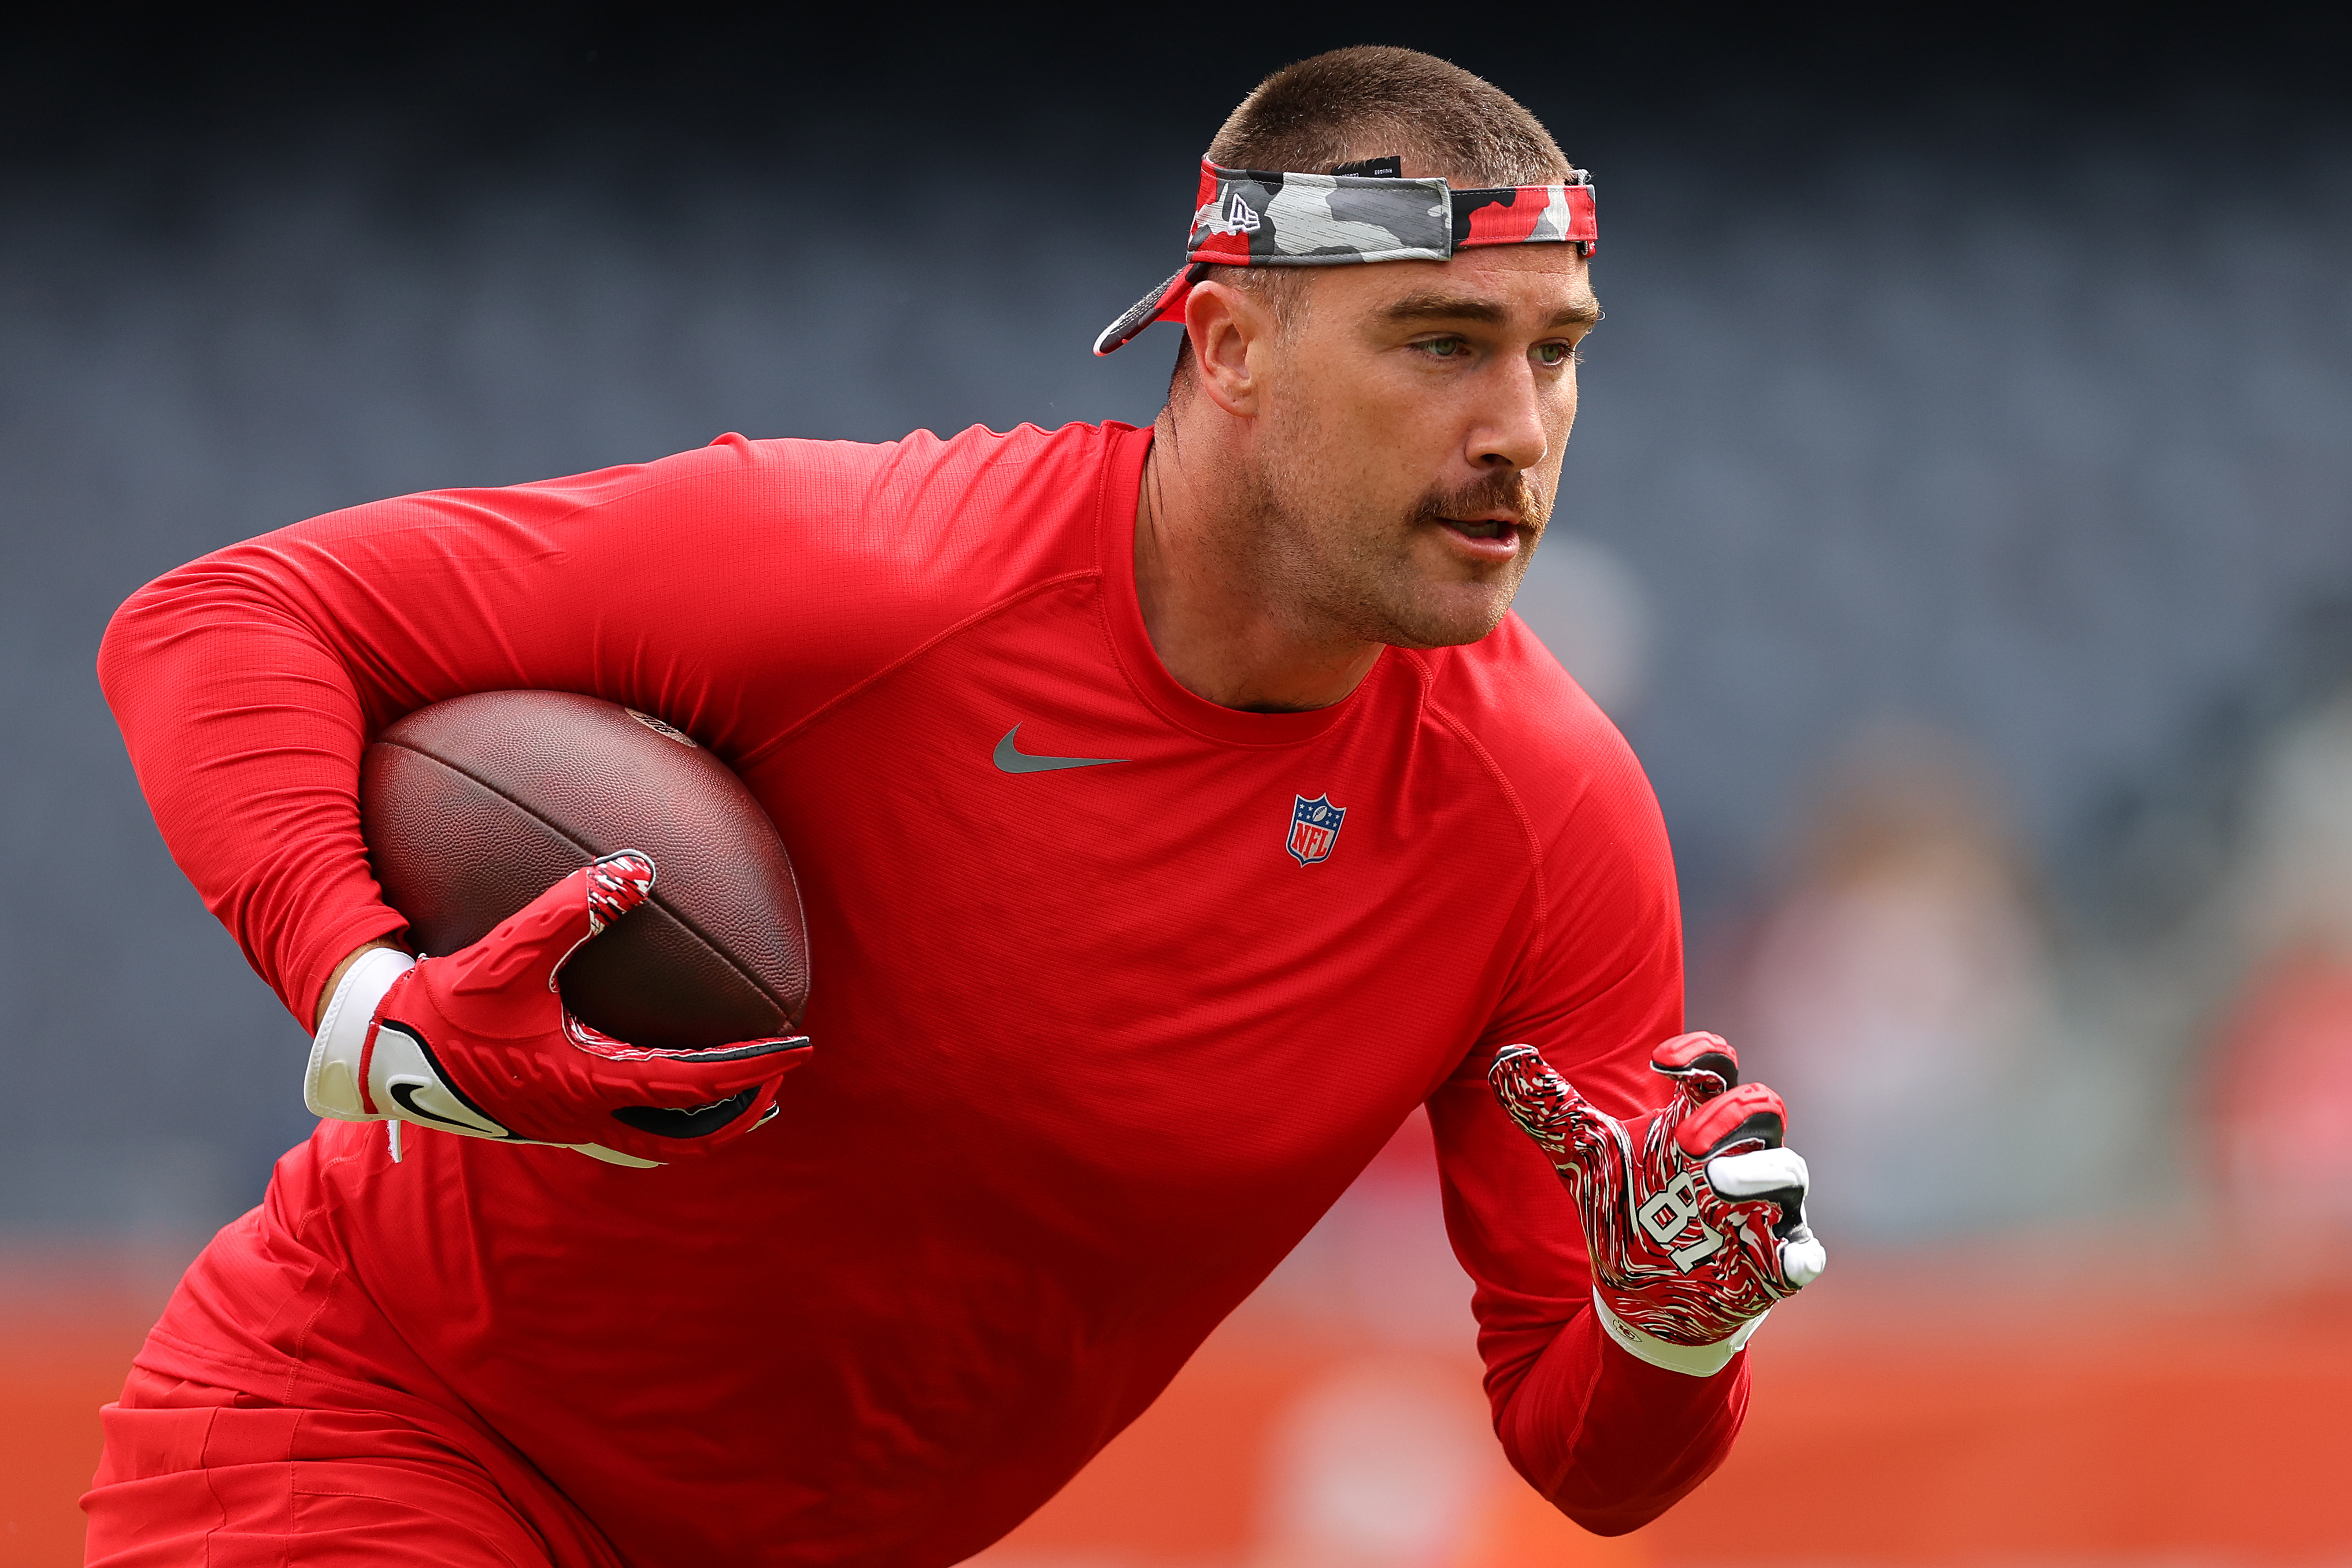 Travis Kelce #87 of the Kansas City Chiefs warms up prior to a preseason game against the Chicago Bears at Soldier Field on August 13, 2022 in Chicago, Illinois.